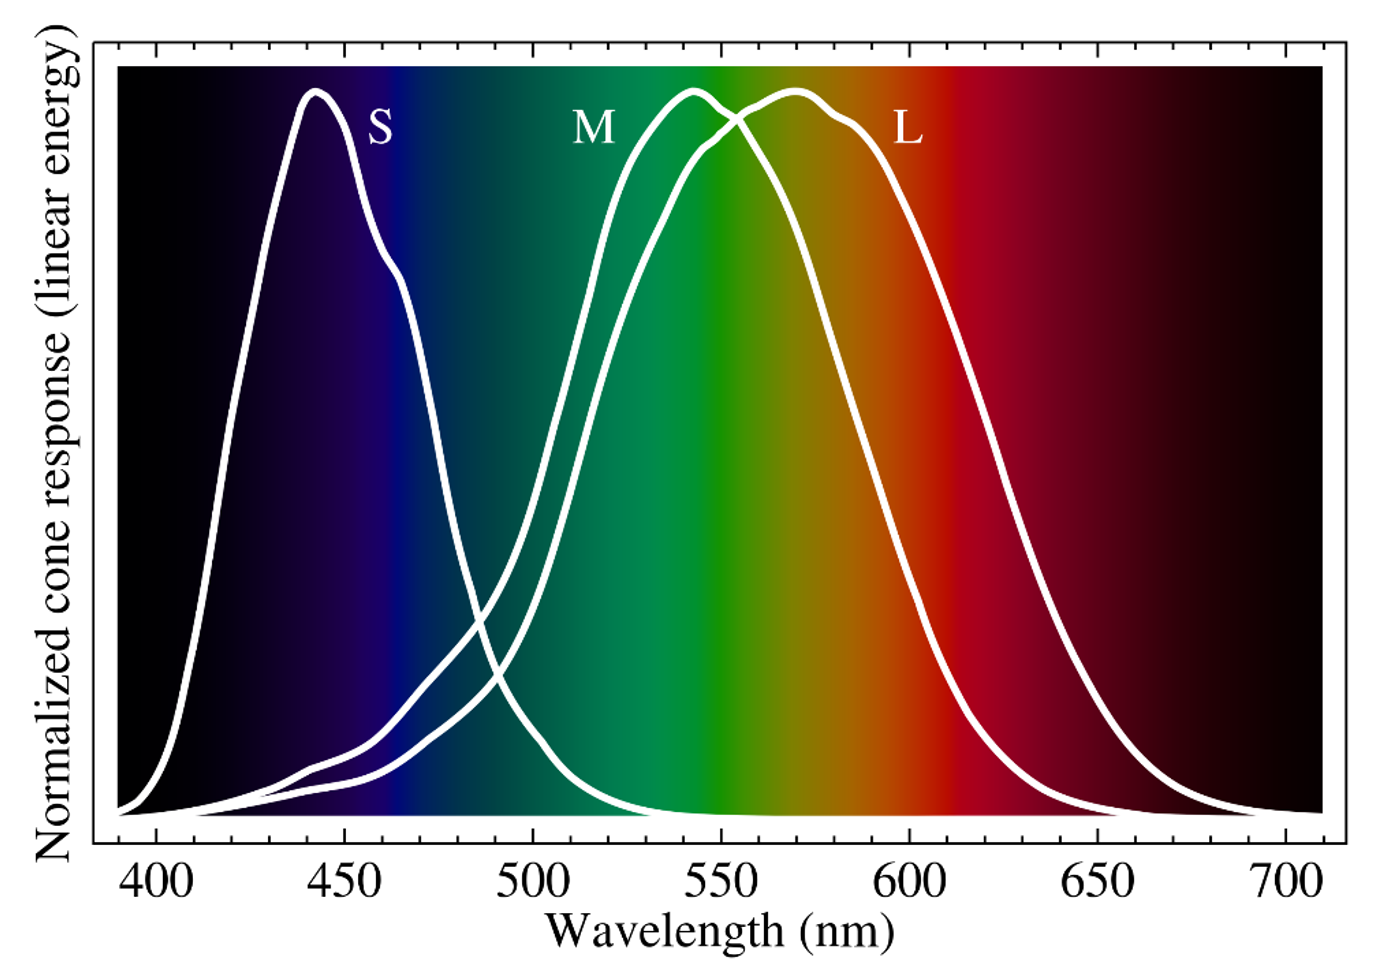 Response-curves of the human eye at different wavelengths